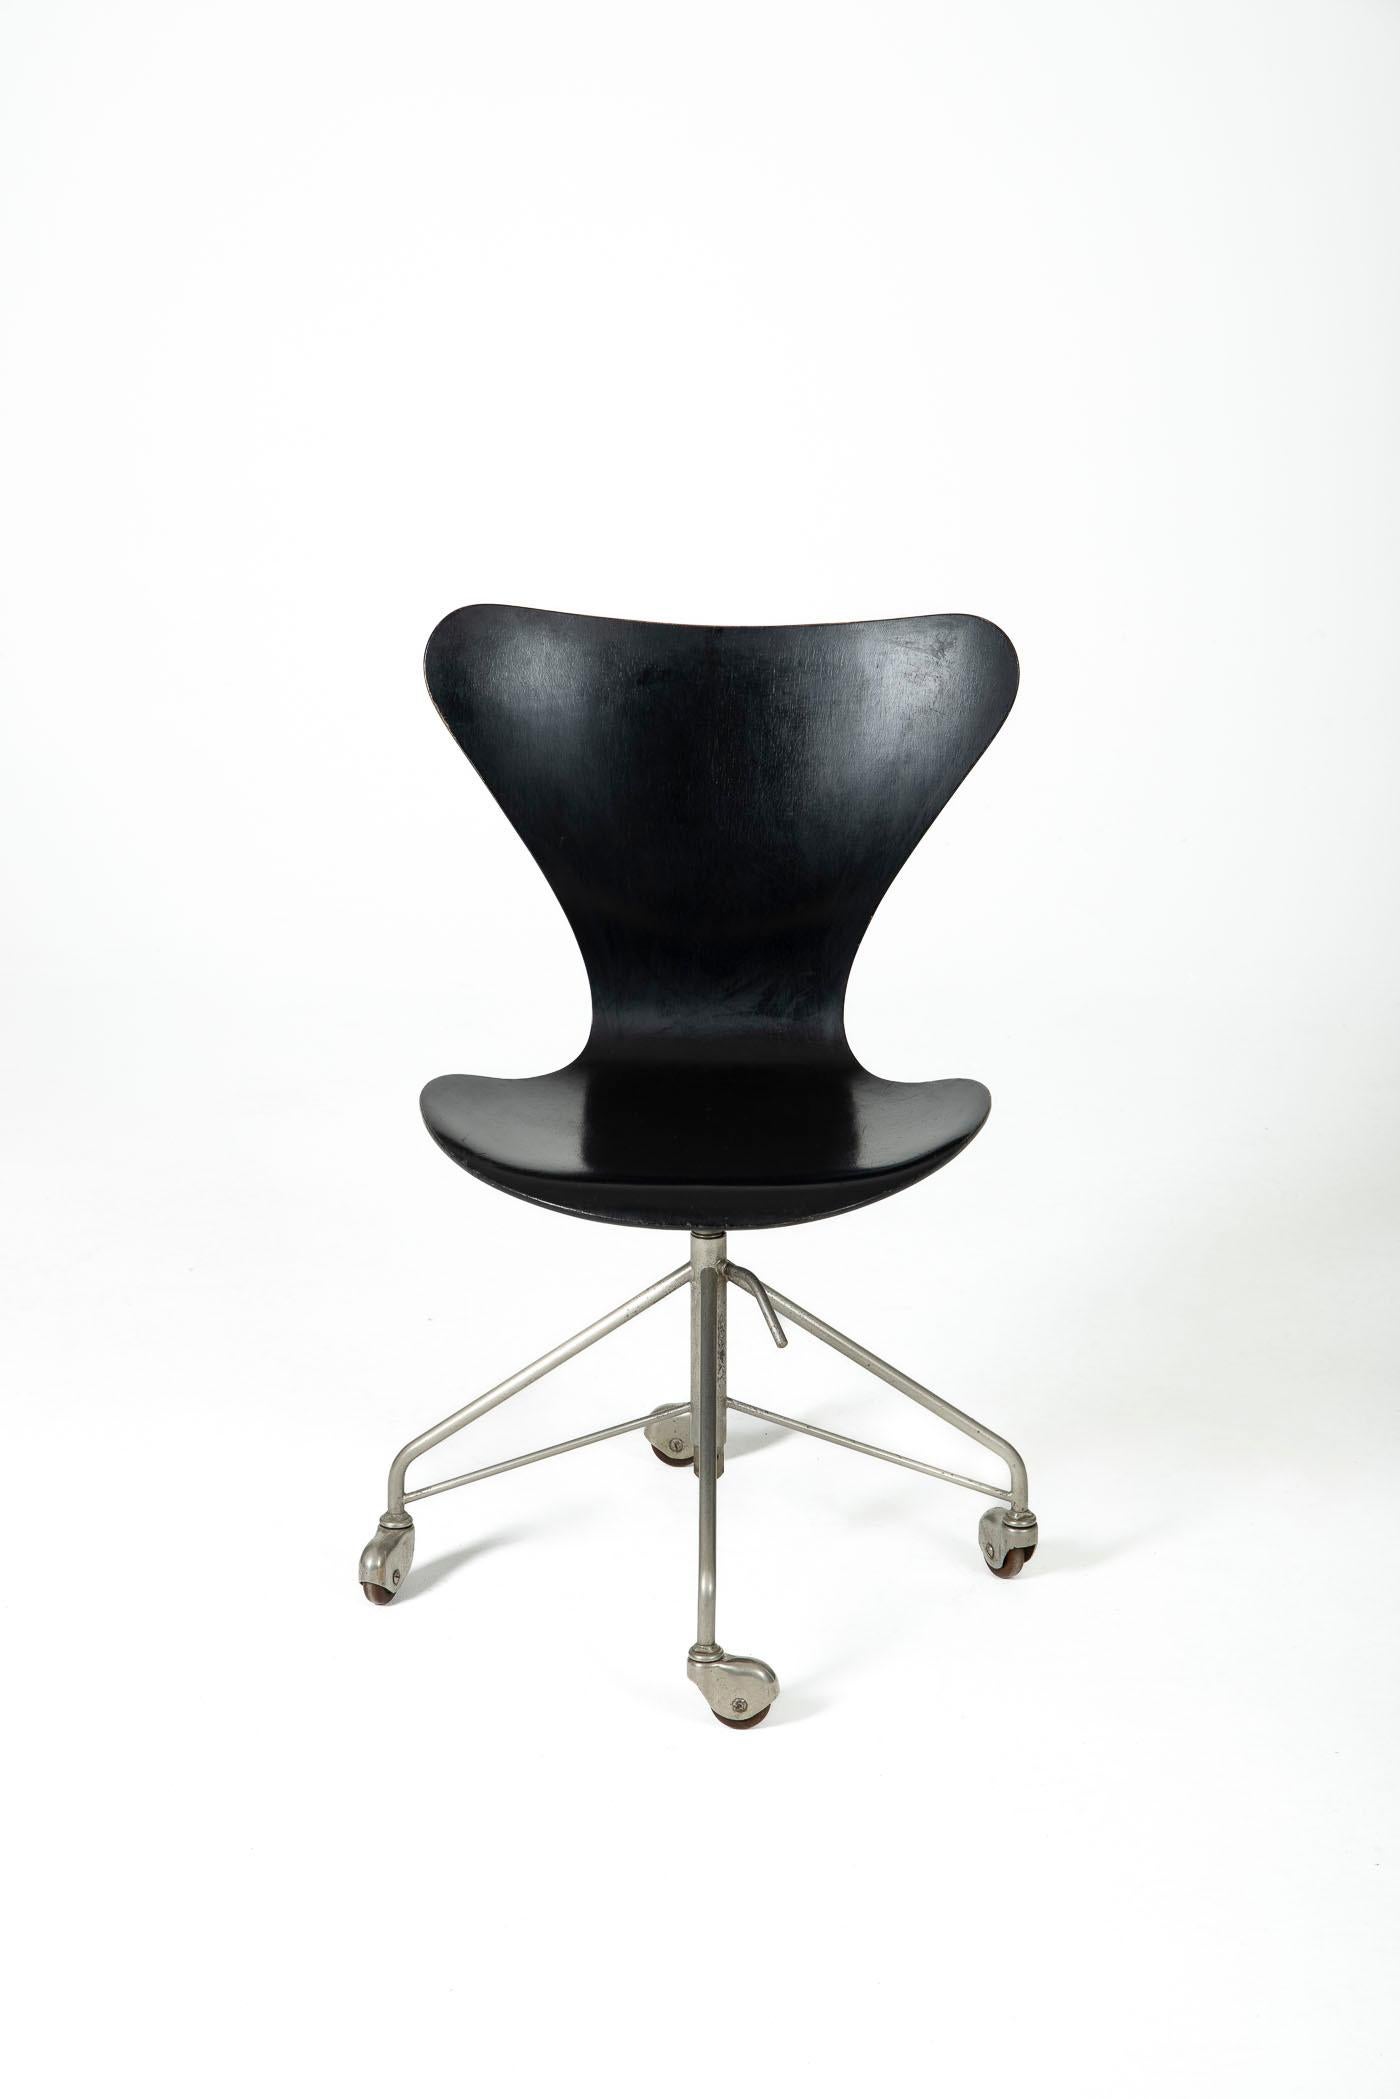 Office chair, model 3117. It is part of the first 5 editions, unique chair of collection.
Designed by Arne Jacobsen for Fritz Hansen. The seat height is adjustable. Shows slight signs of wear, but is in good condition.